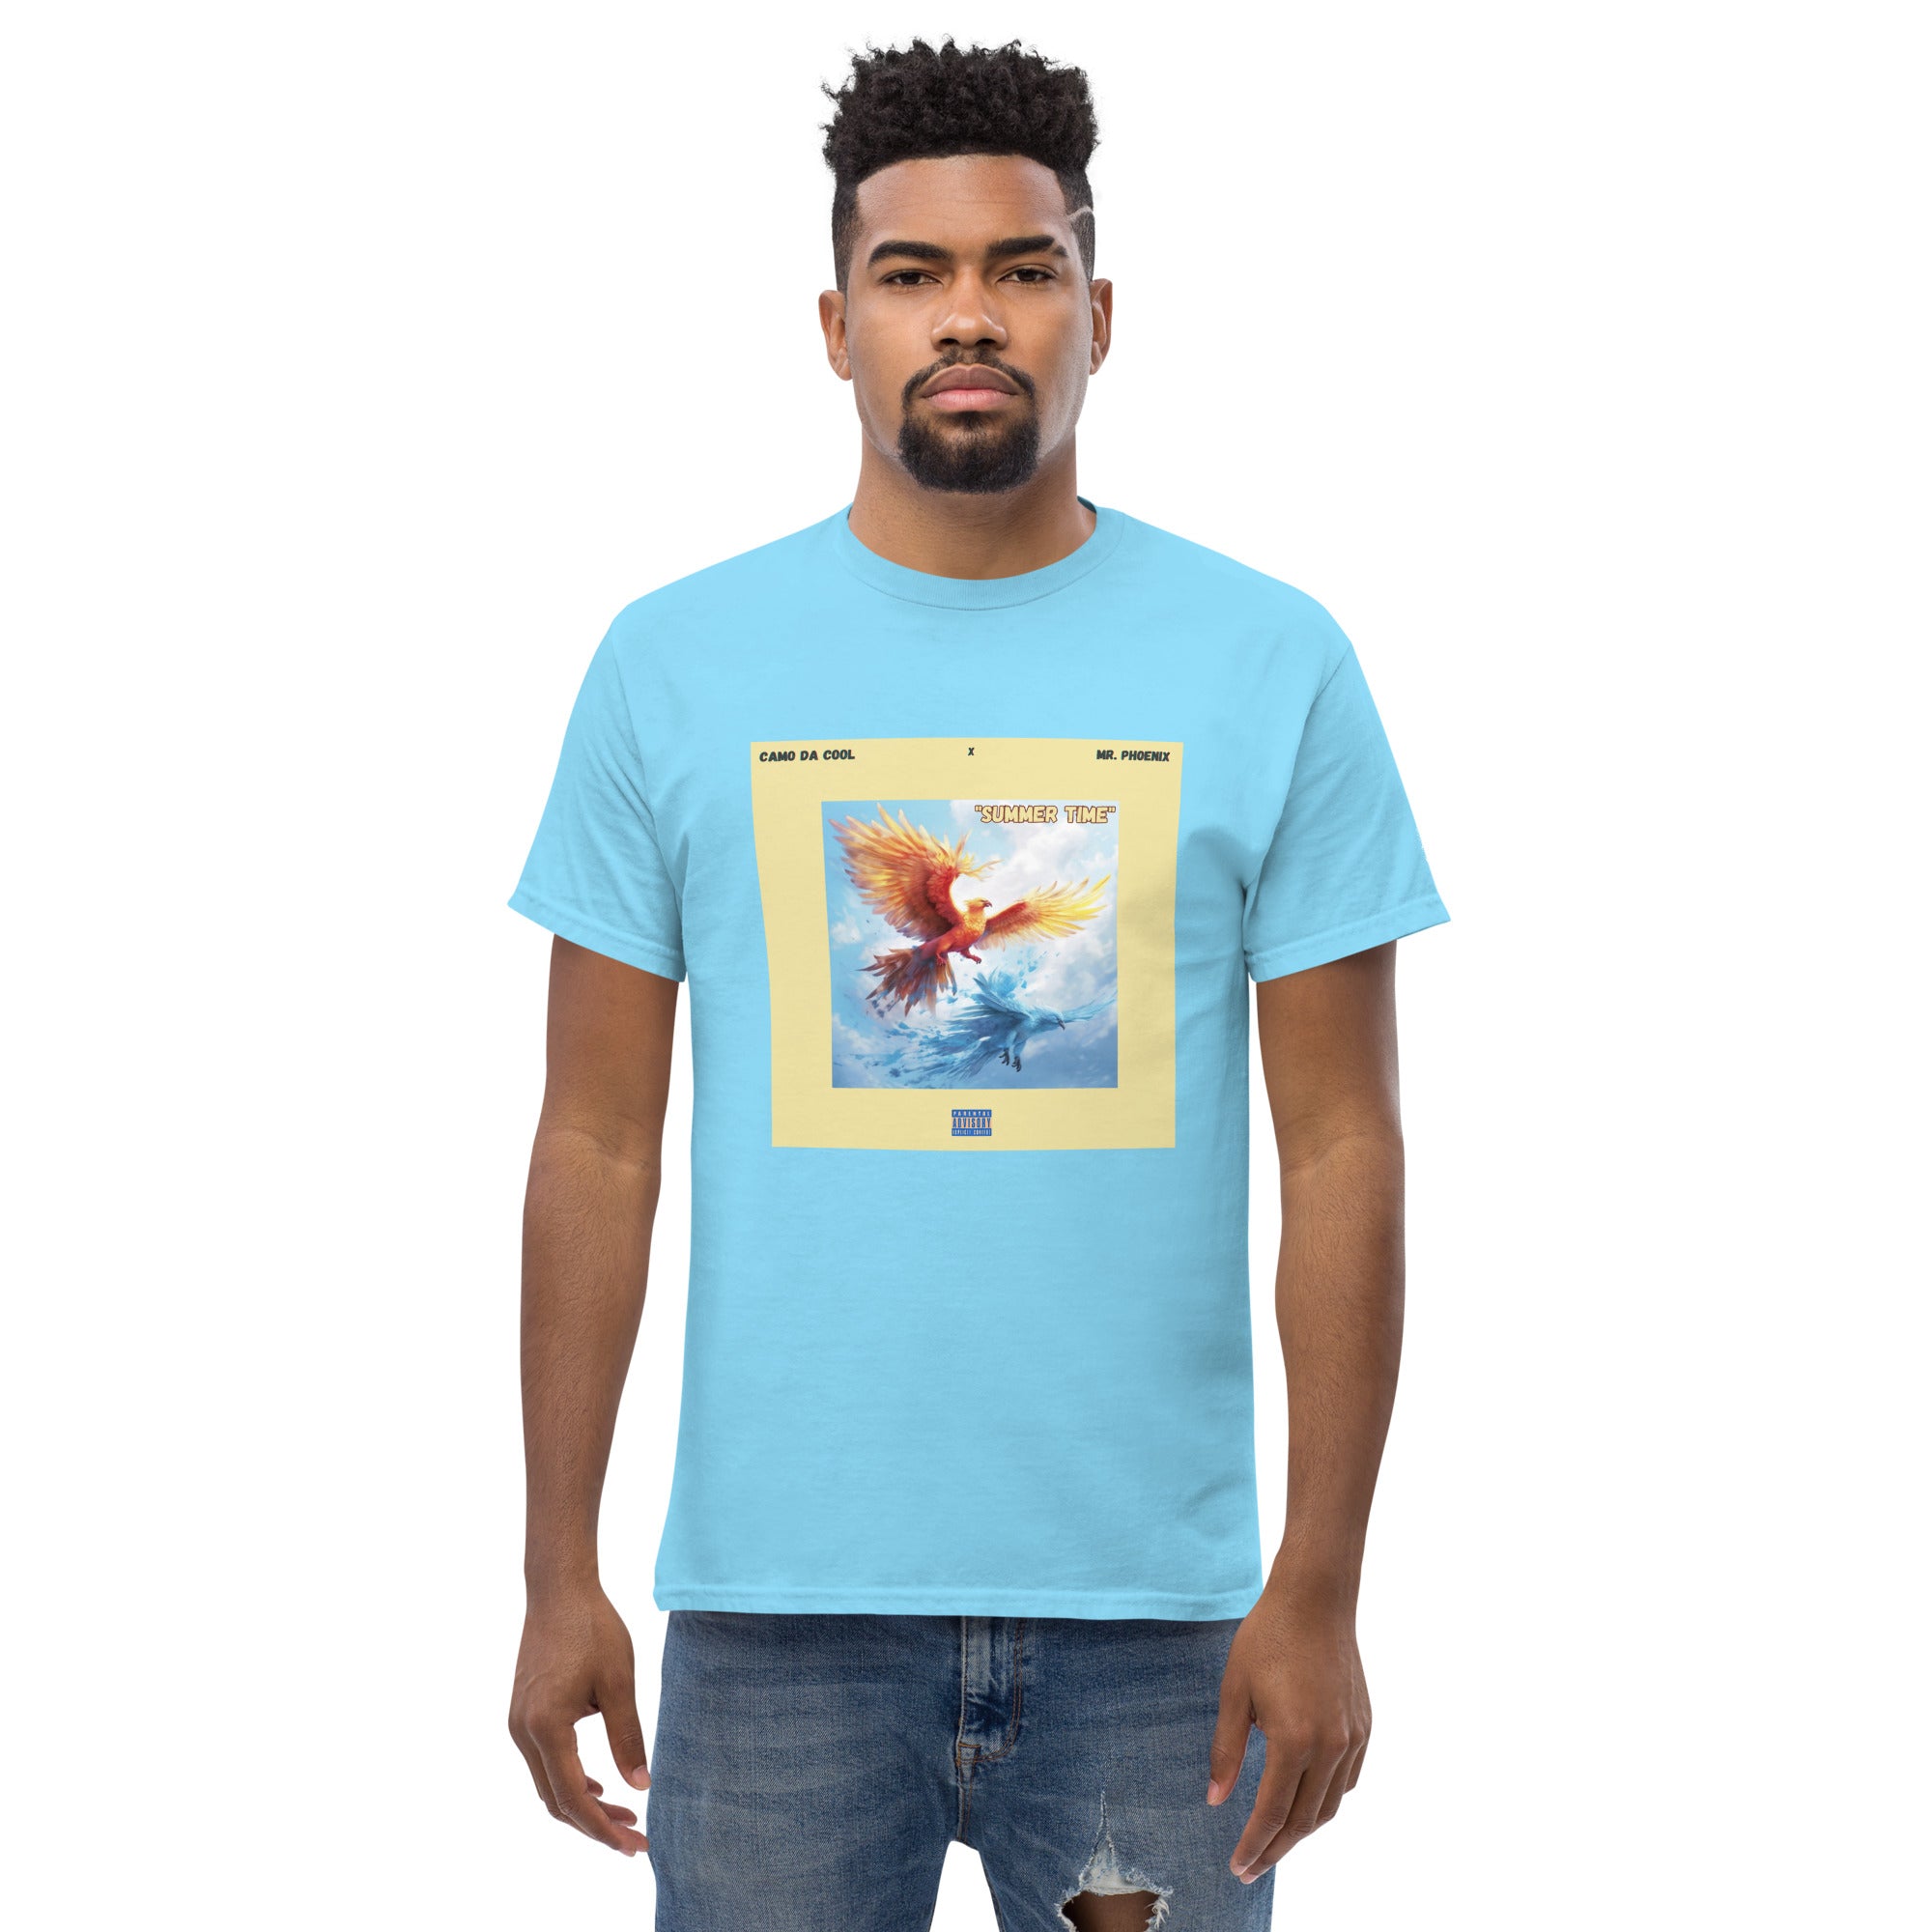 Awesomelife "Summer Time" Men's classic tee